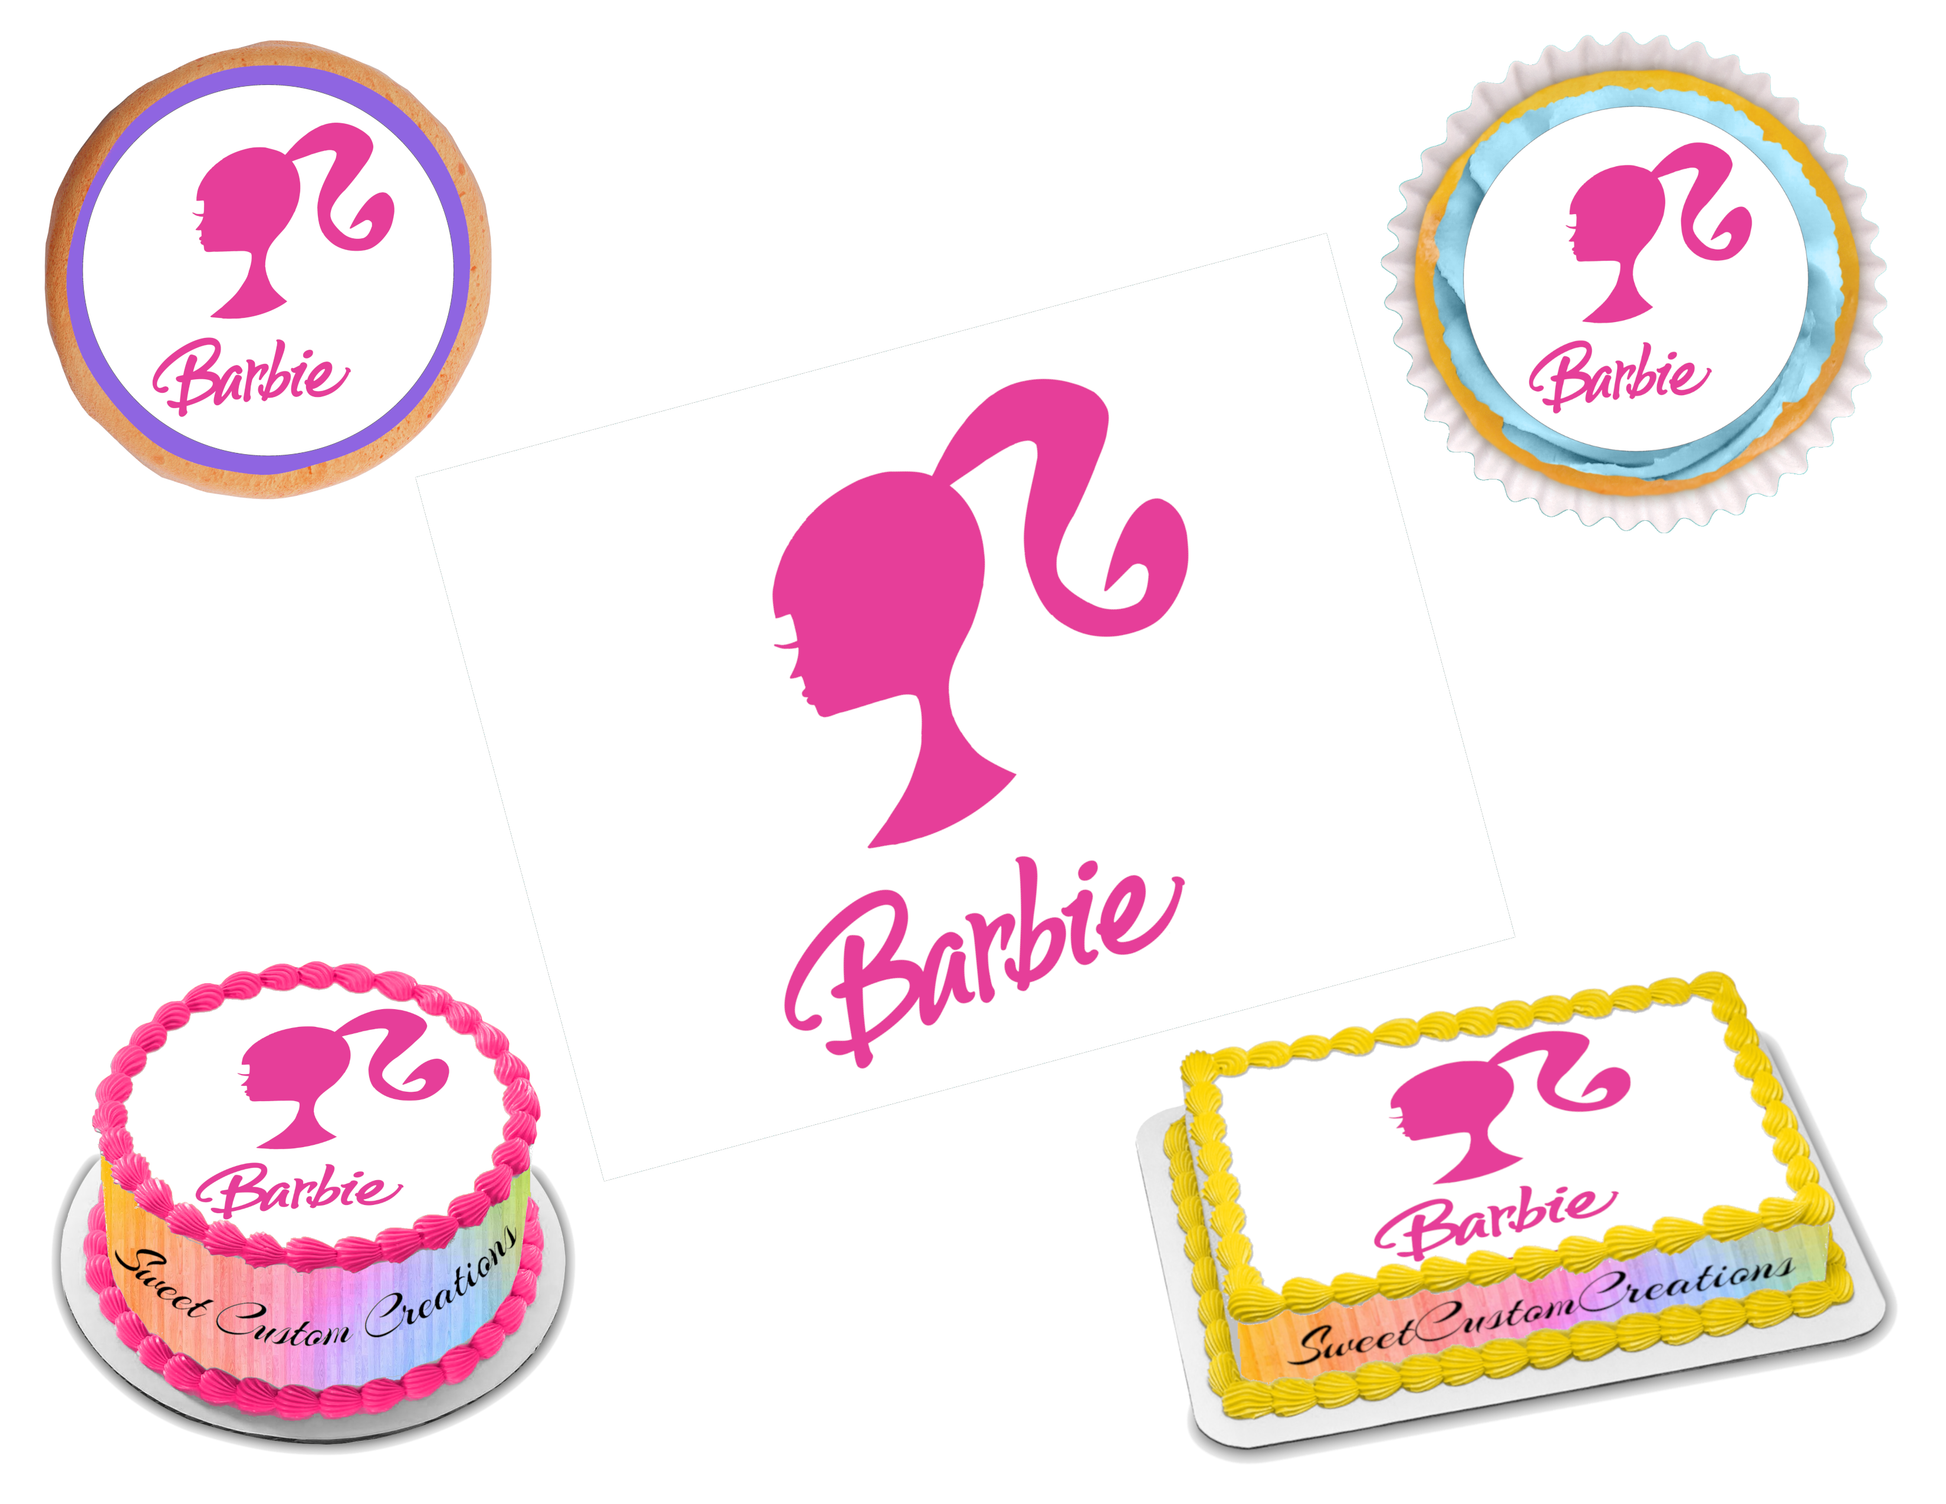 Barbie Silhouette Logo Edible Image Frosting Sheet #95 Topper (70+ sizes)